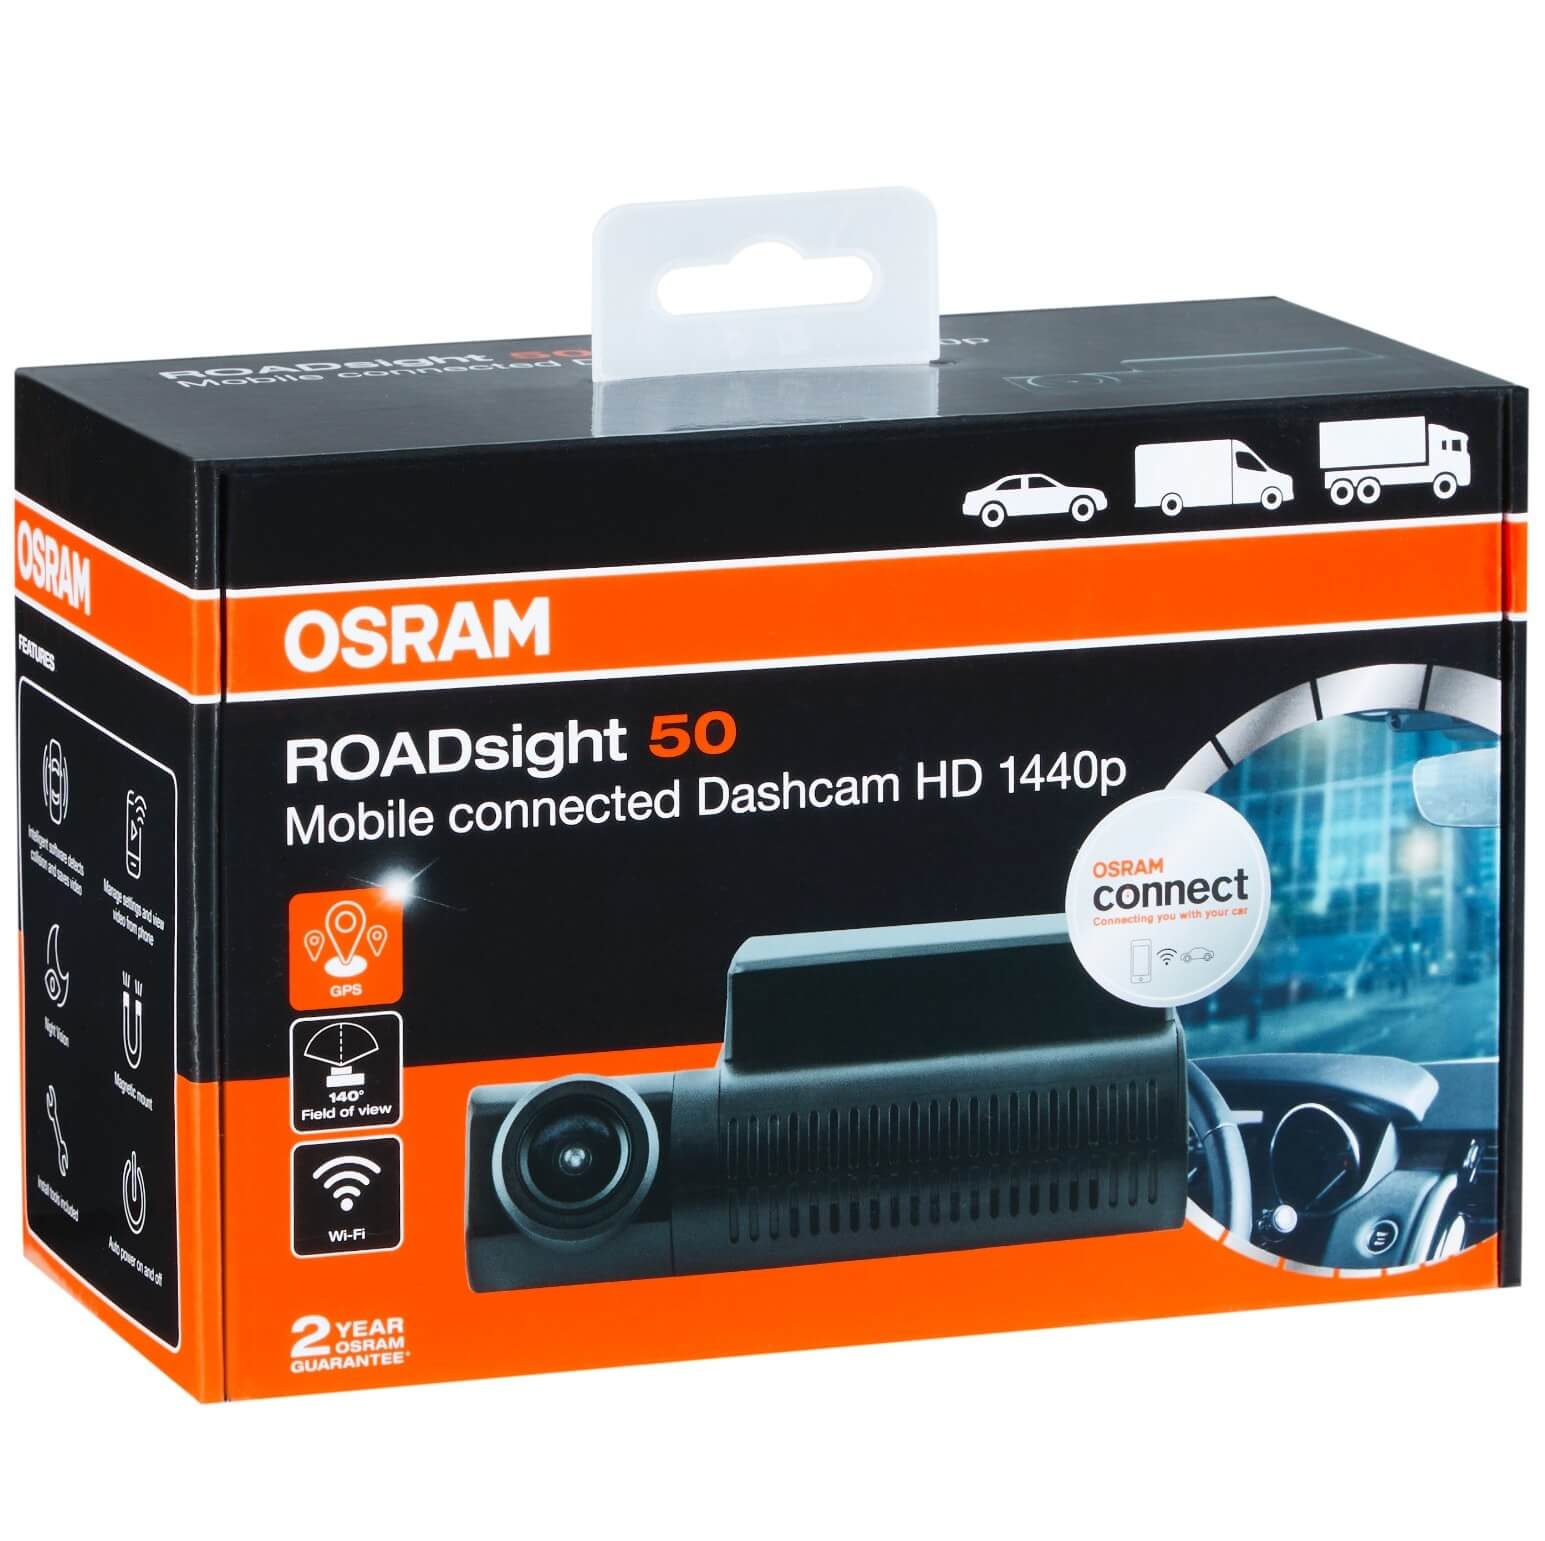 OSRAM ROADsight 50 for cars, trucks with WiFi and GPS